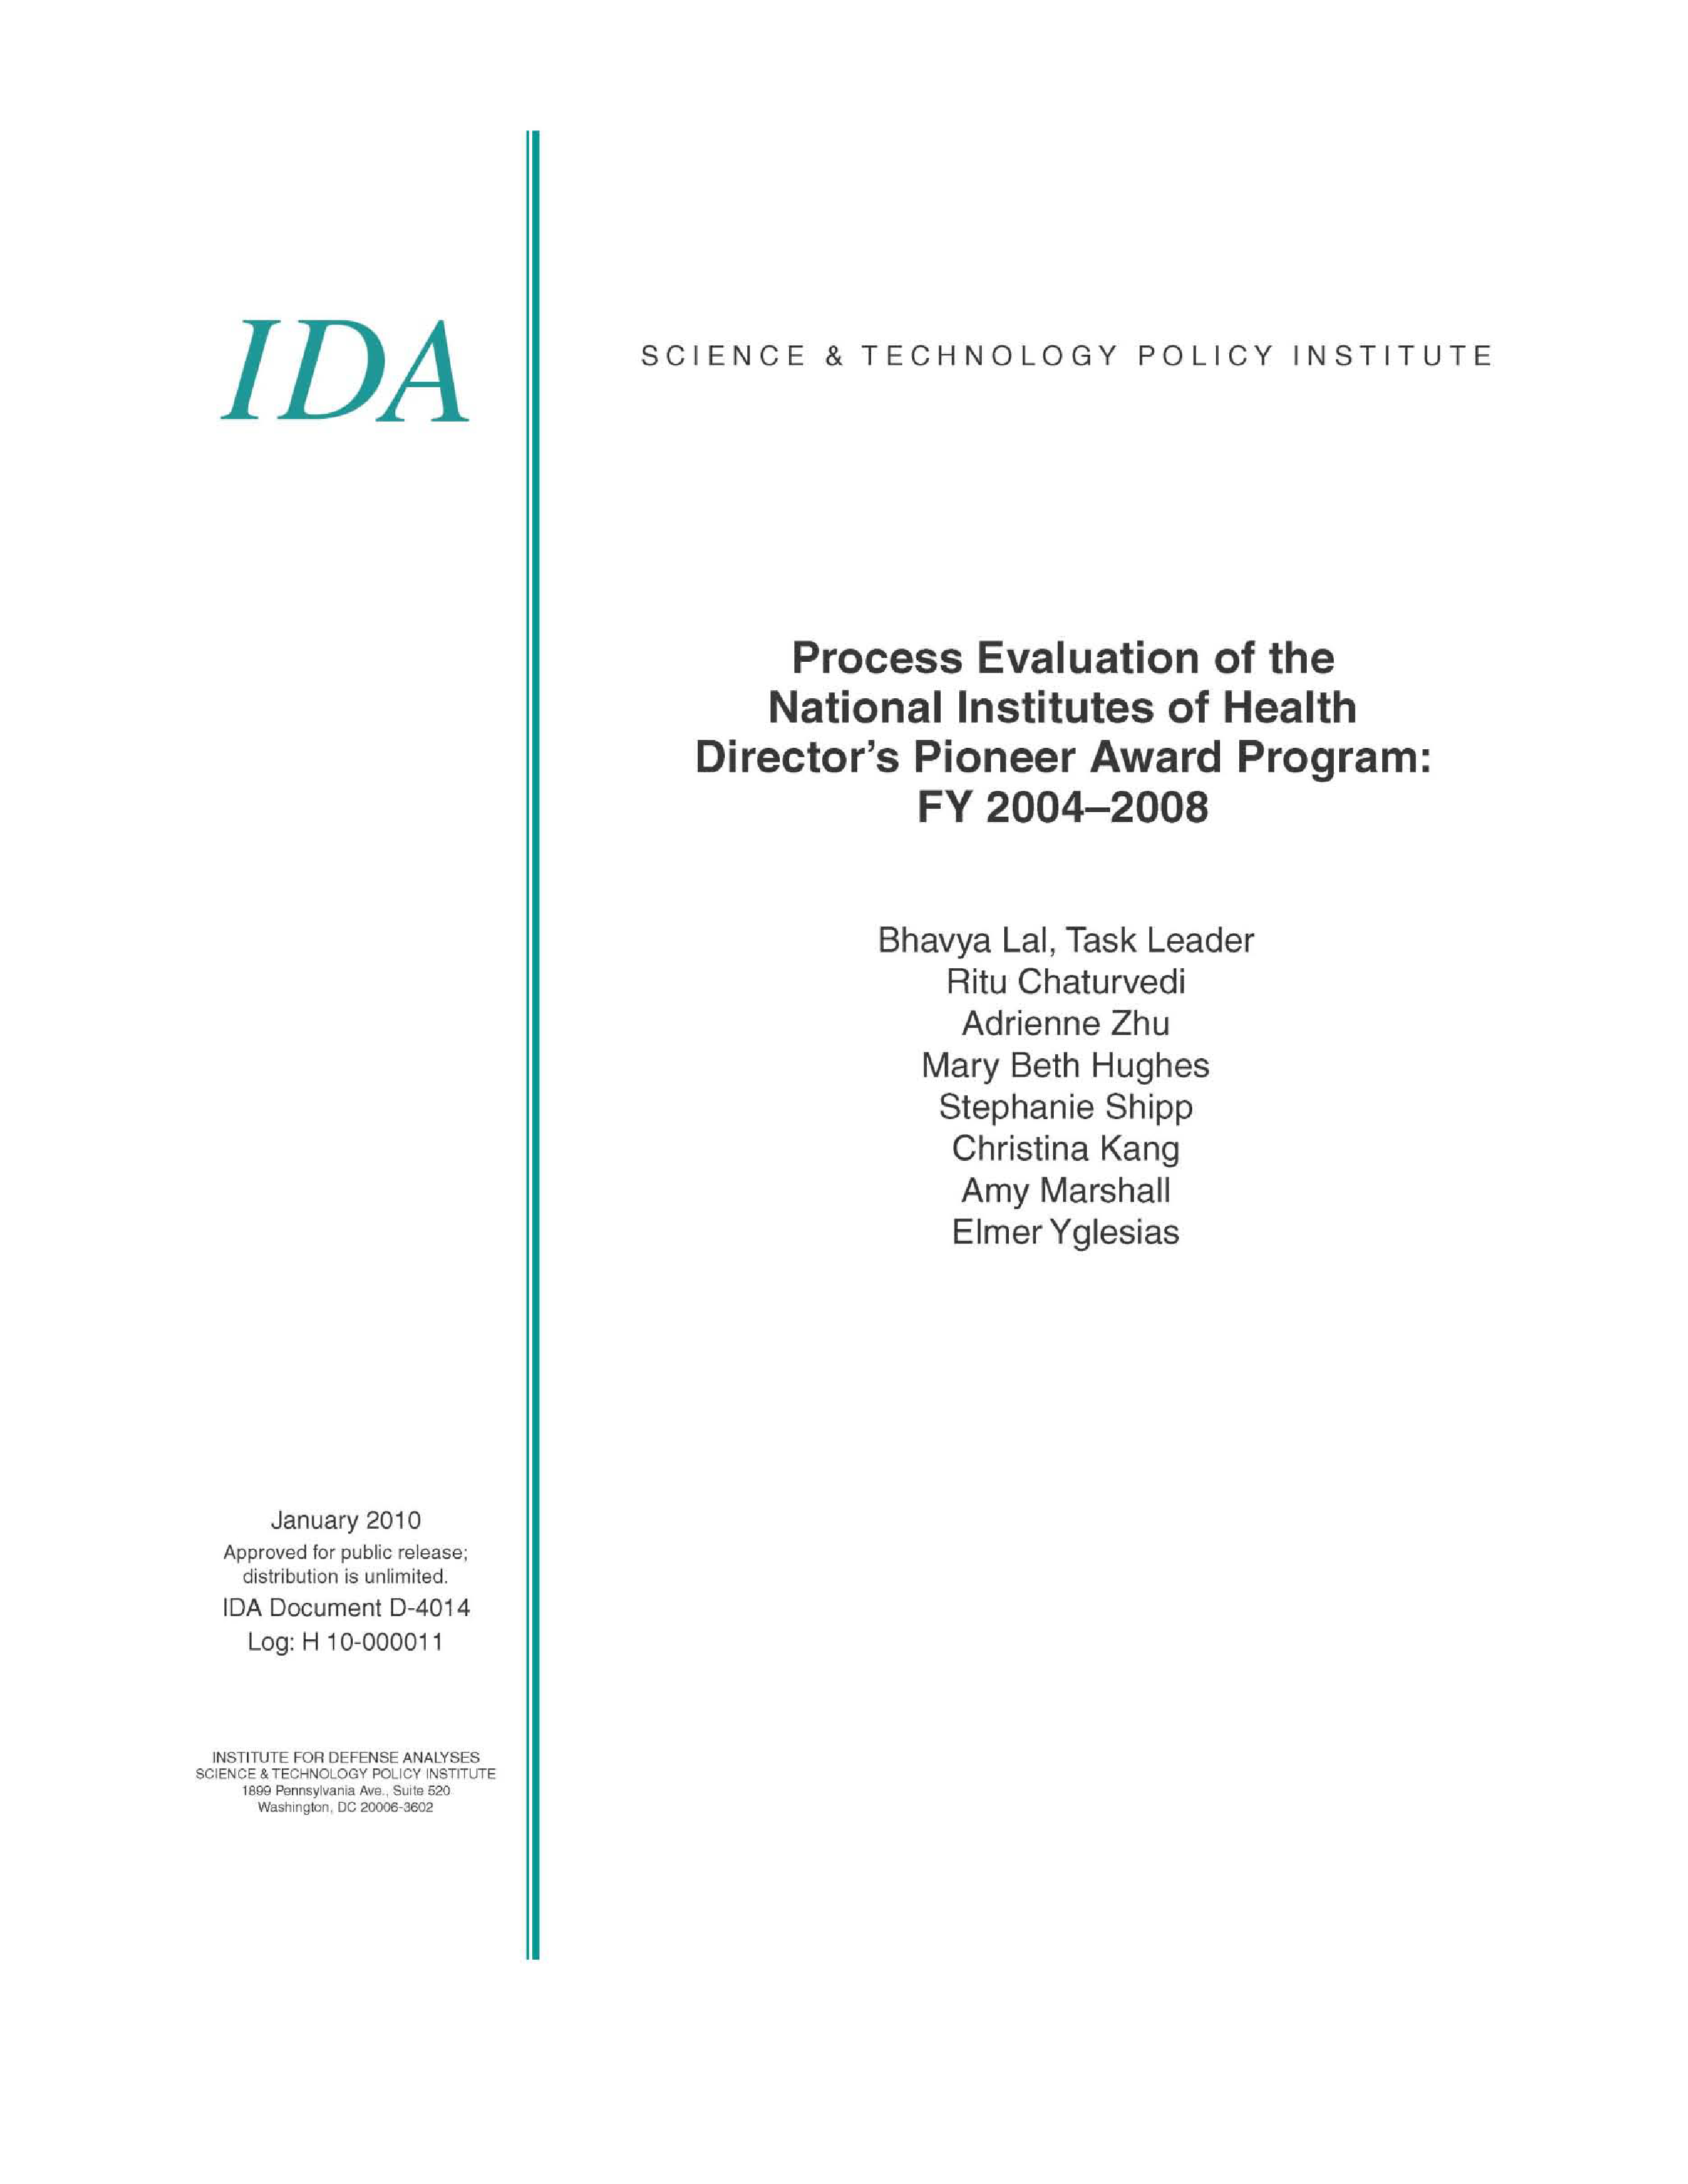 Process Evaluation of the National Institutes of Health Director